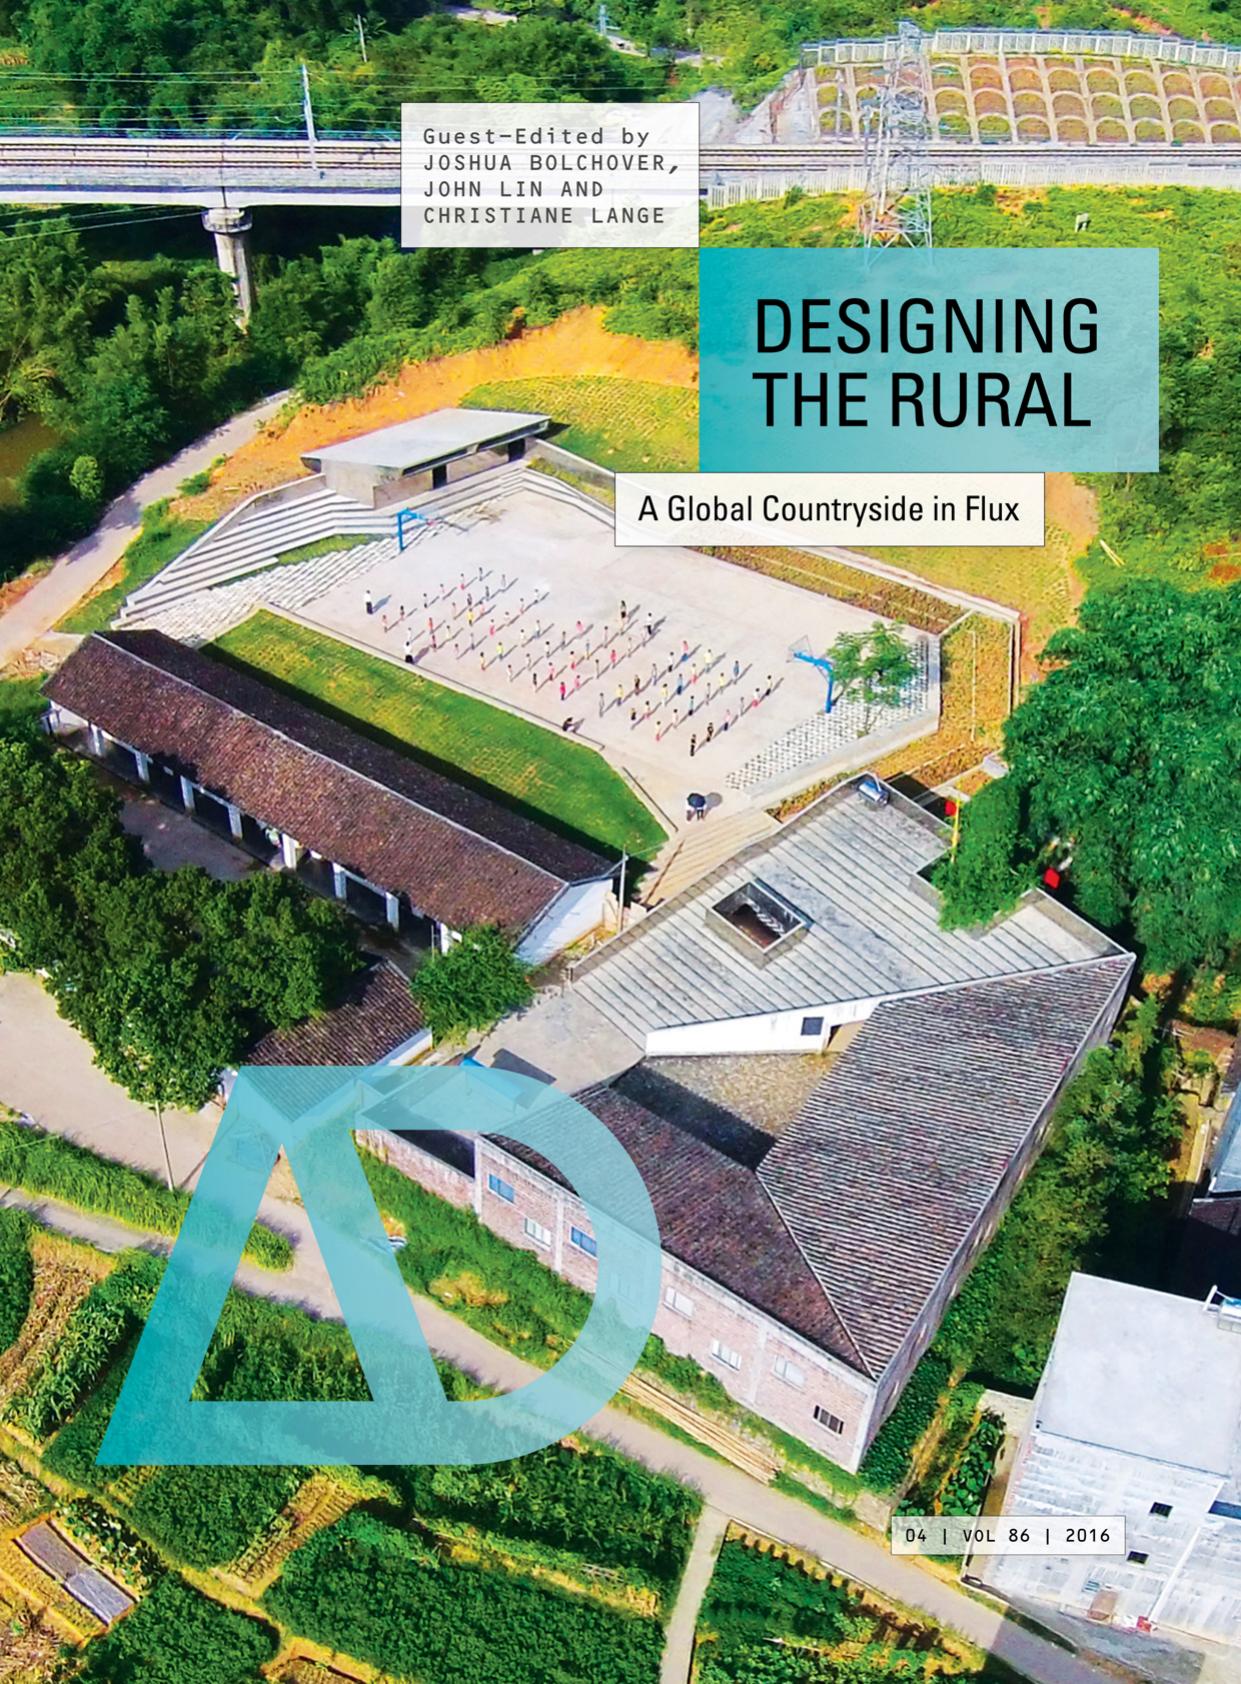 Designing the Rural: A Global Countryside in Flux by Joshua Bolchover; John Lin; Christiane Lange